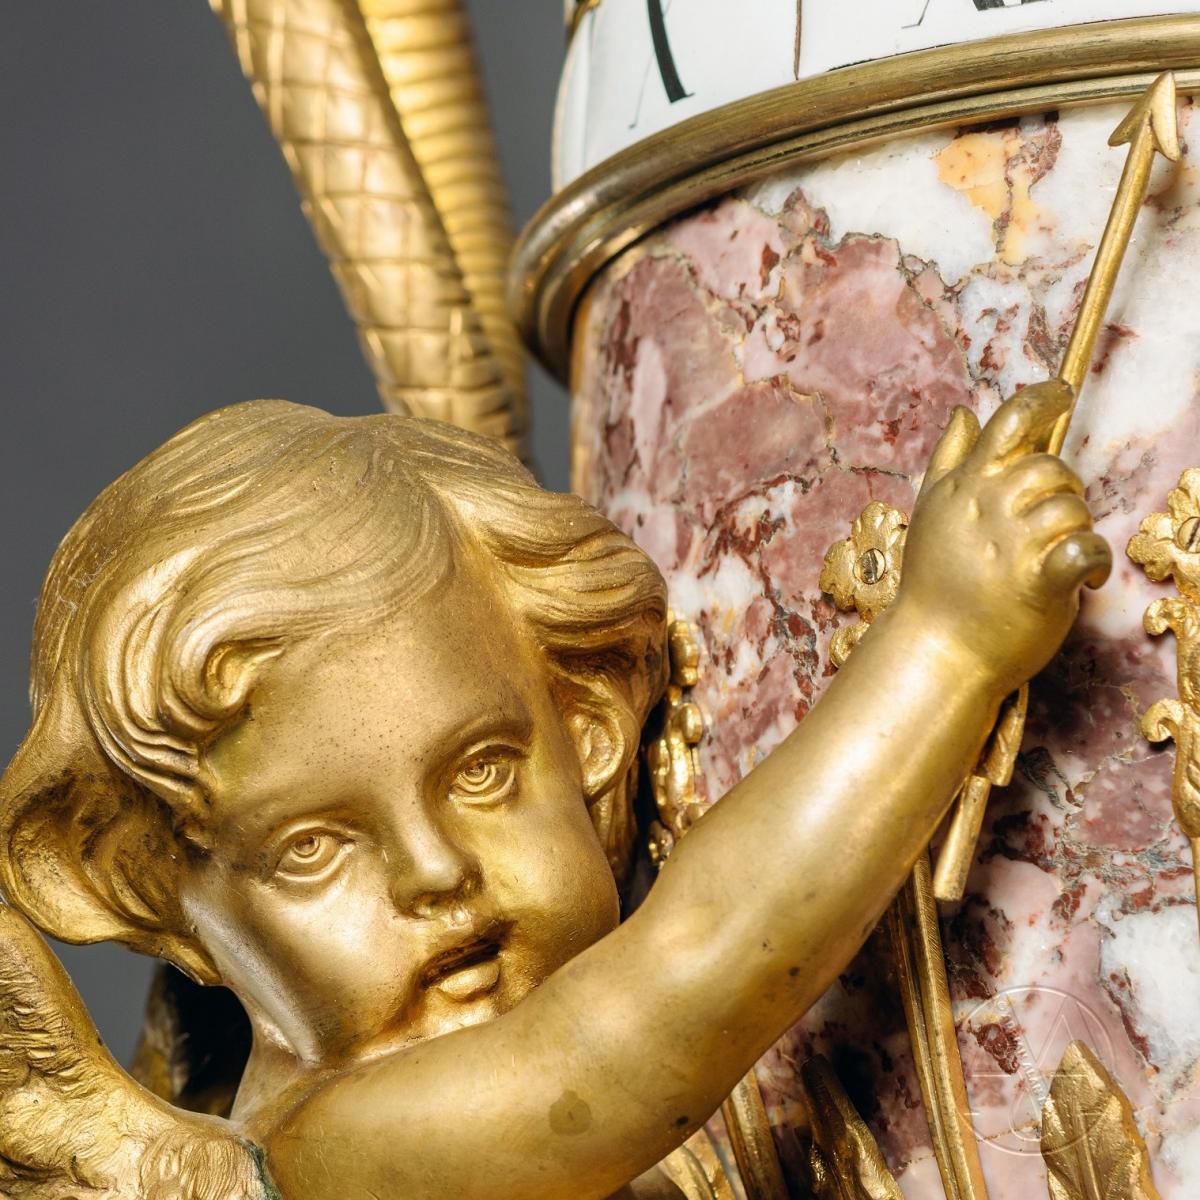 A Rare Louis XVI Style Gilt-Bronze Mounted Marble Annular Dial Pedestal Clock In The Manner of Jean-André and Jean-Baptiste Lepaute